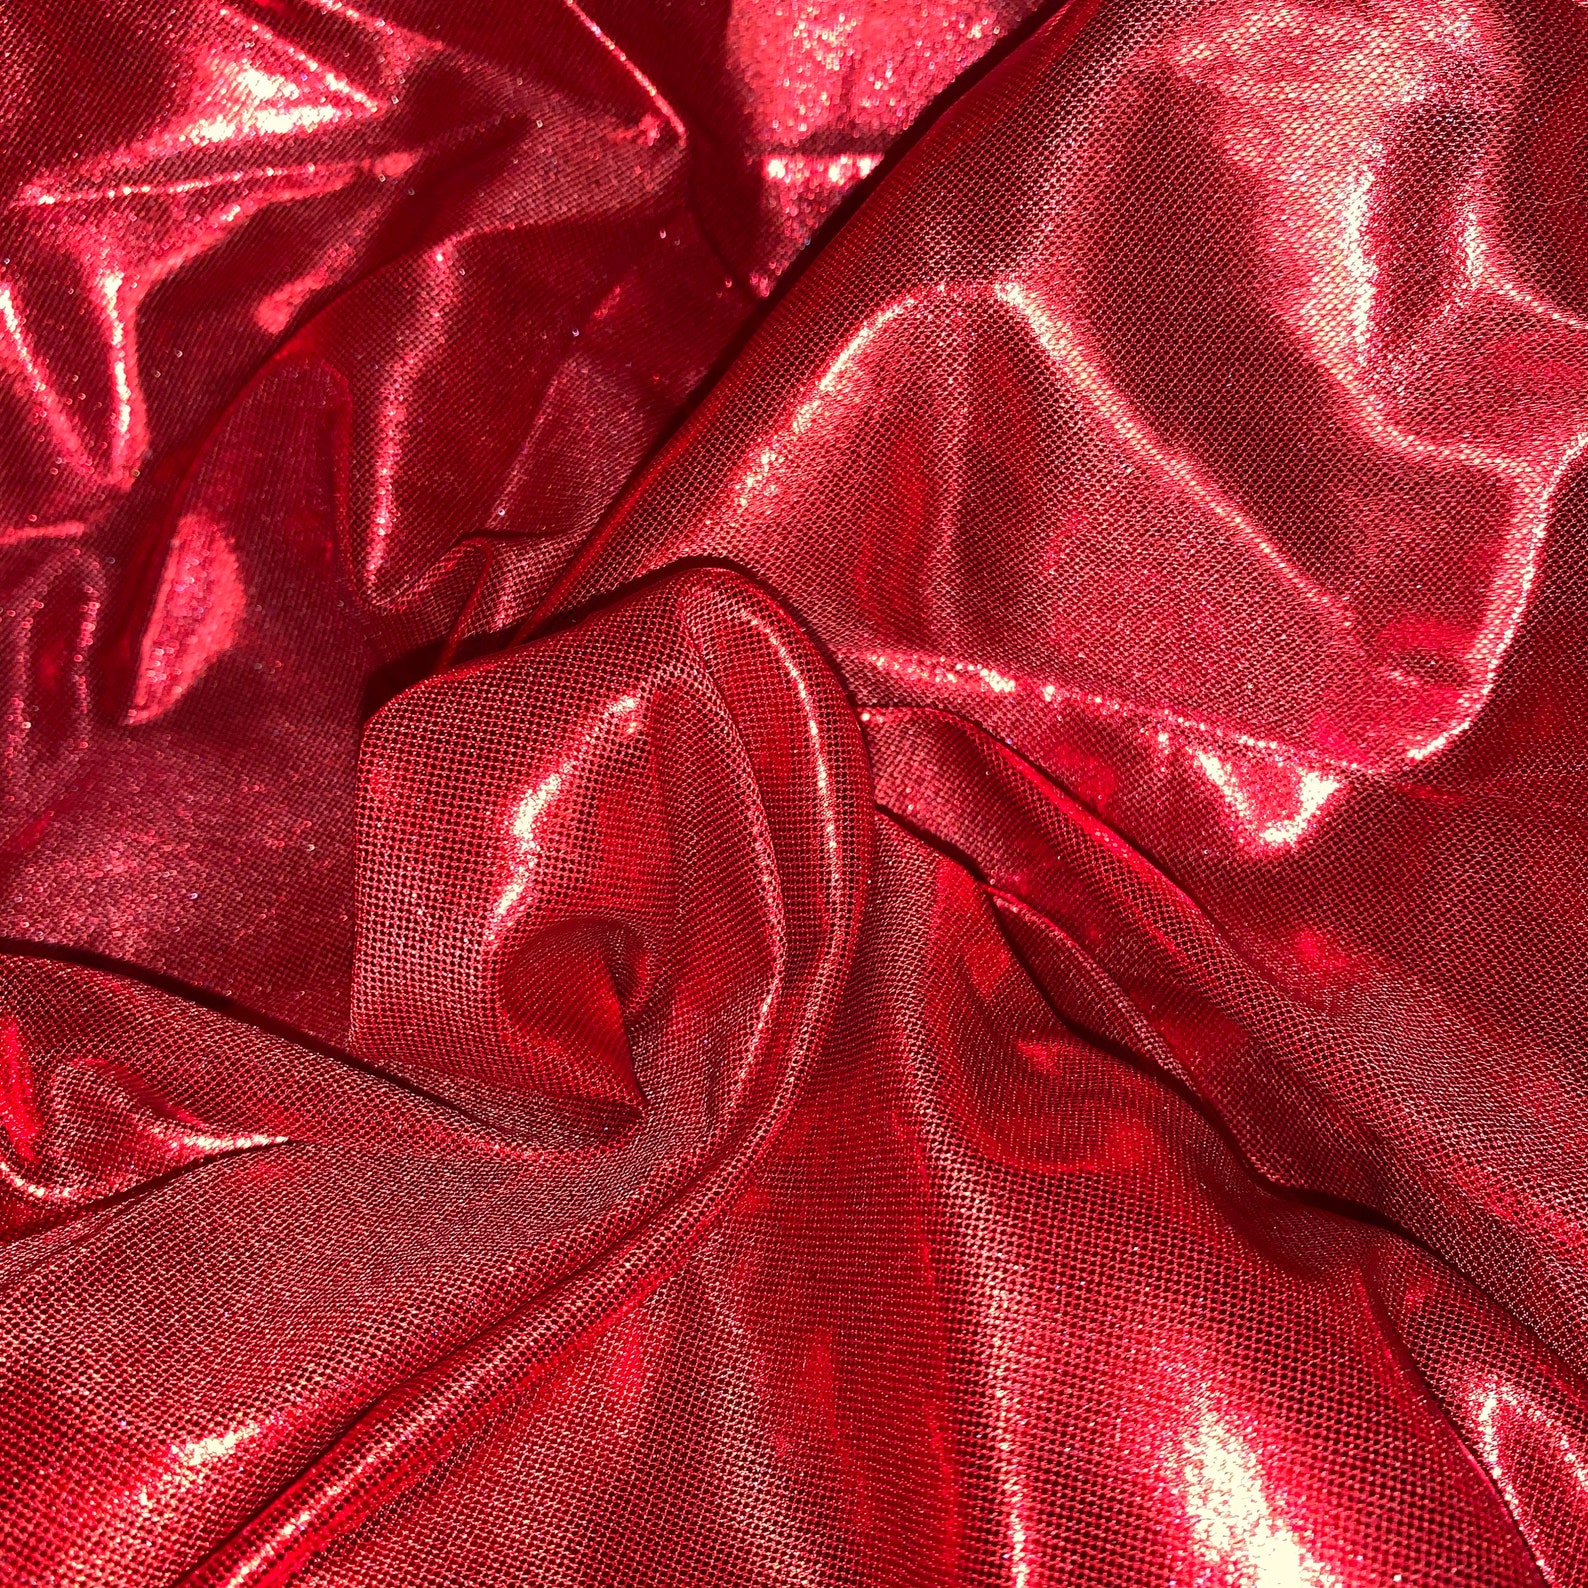 Red Glitzy Metallic Foil Liquid Lame Fabric Sold by the Half | Etsy